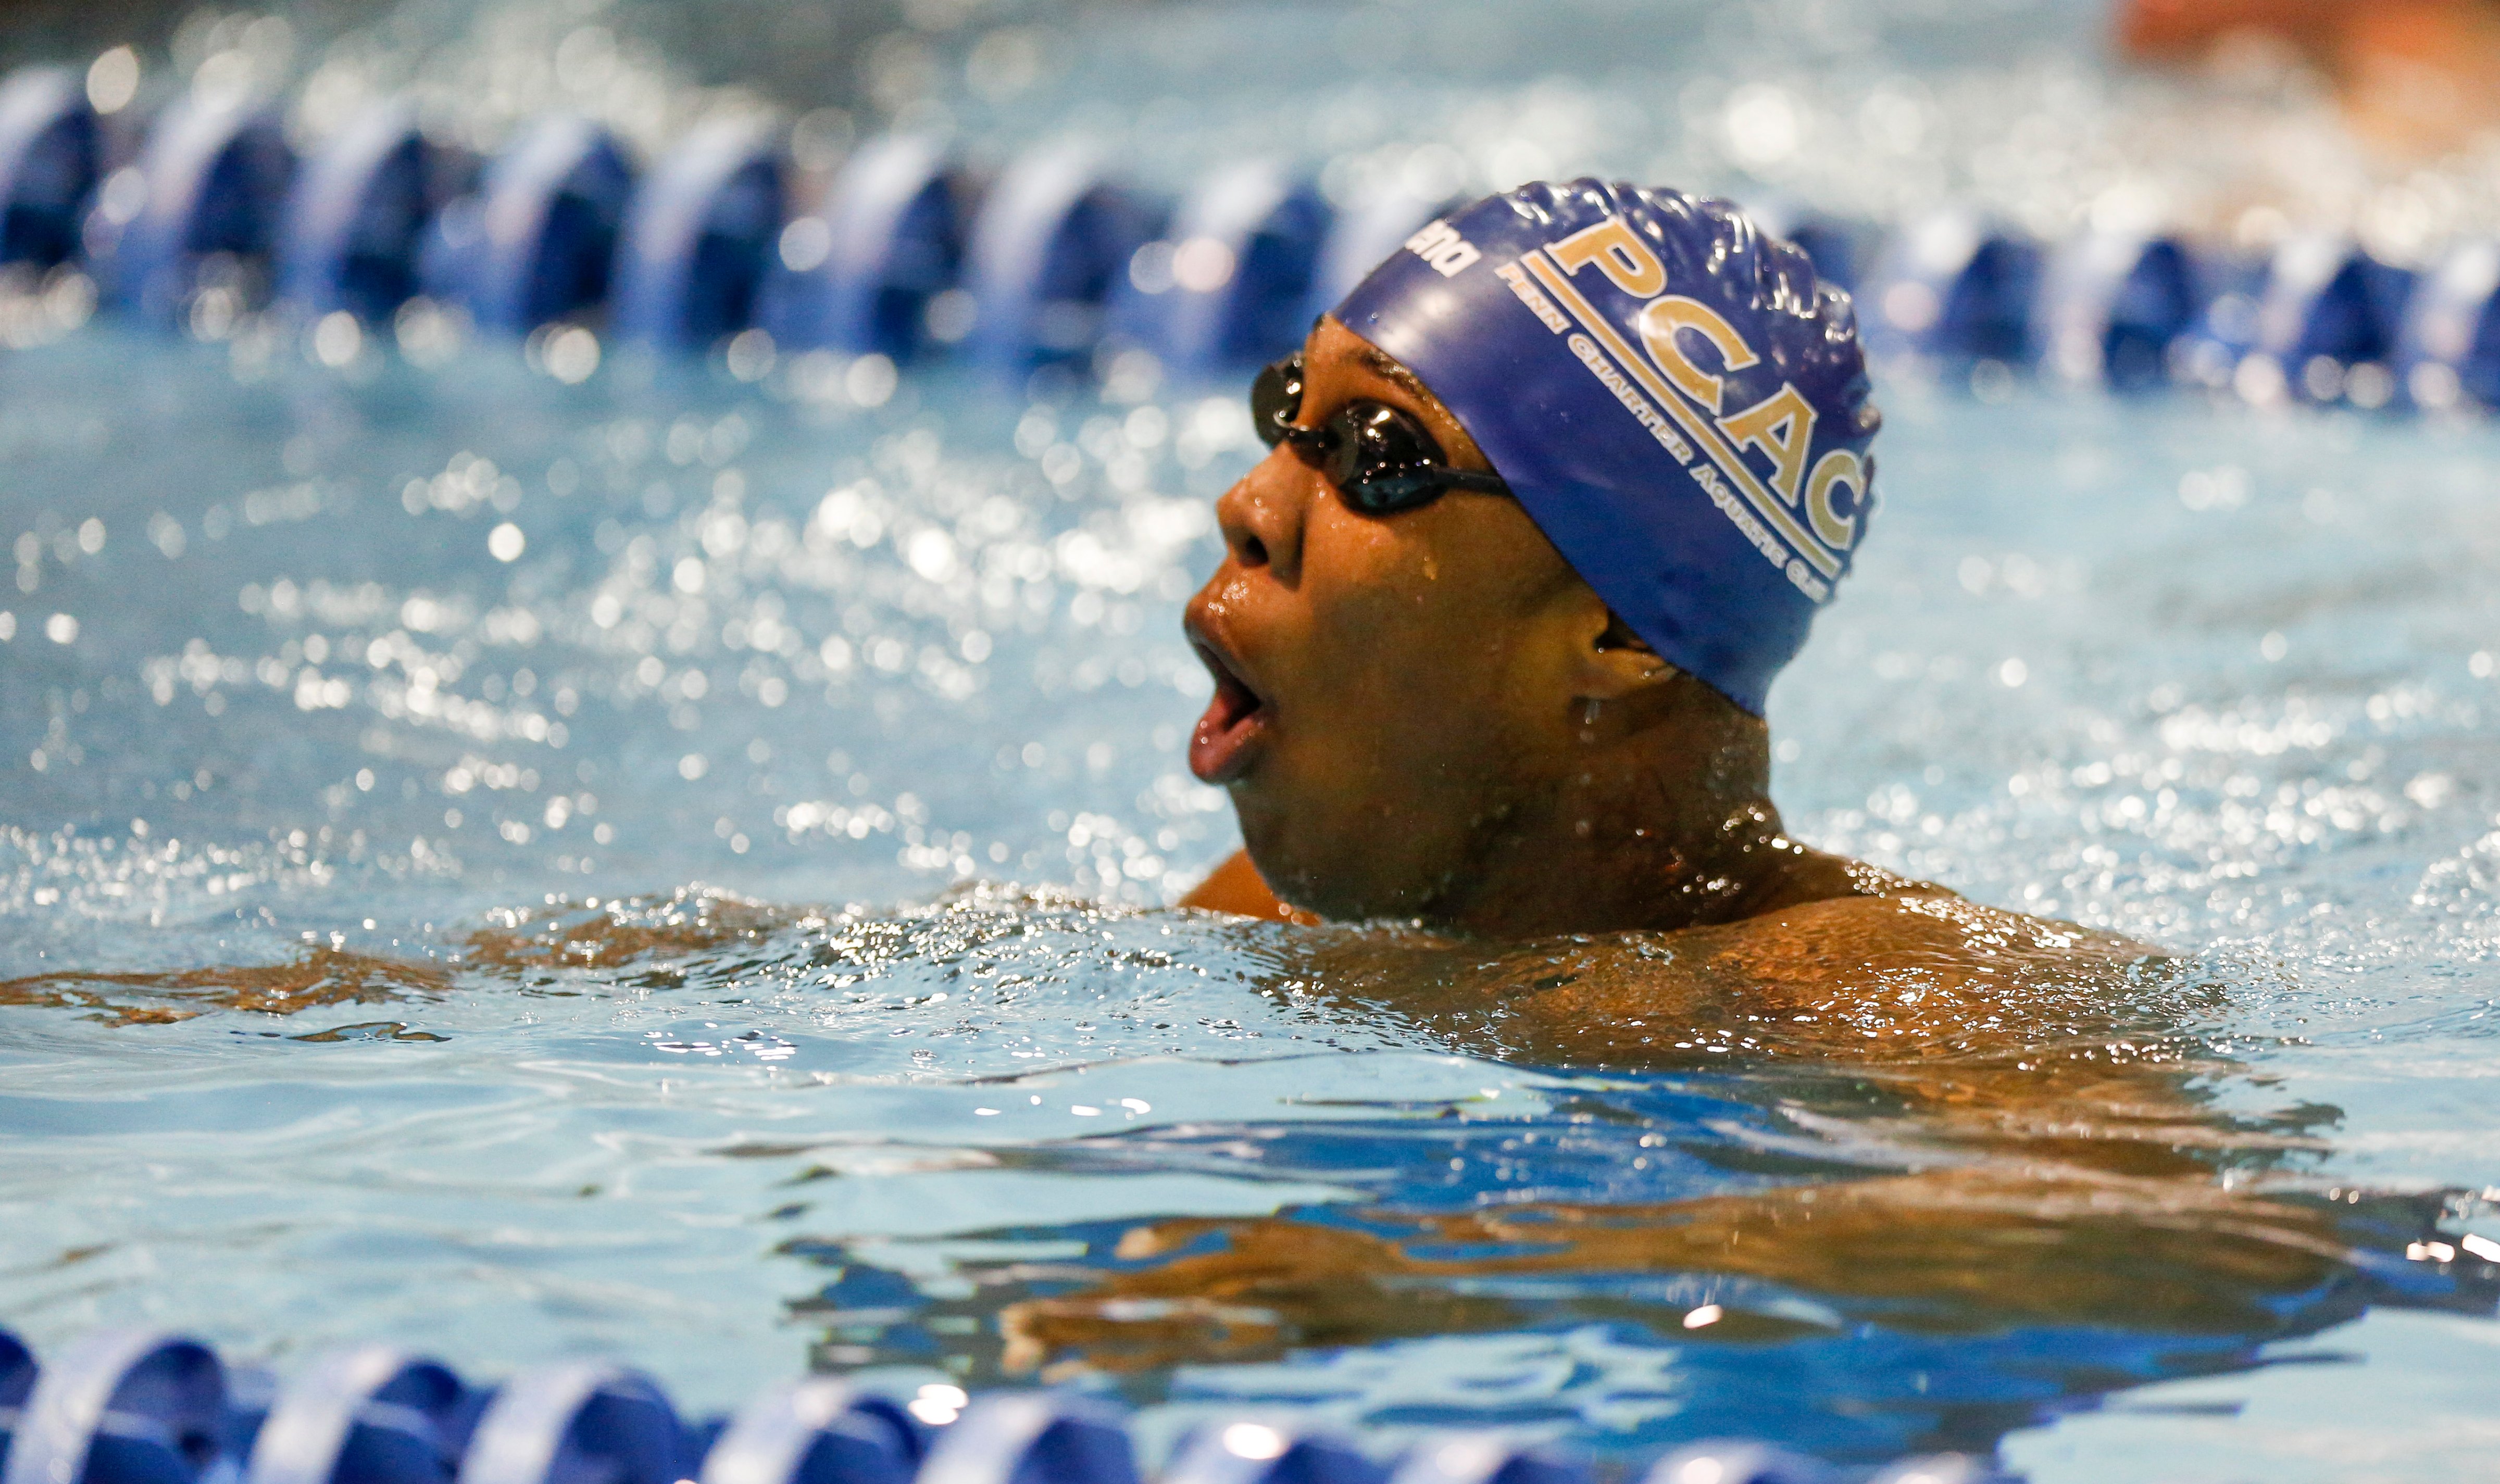 Reece Whitley at the Arena Pro Swim Series meet in Charlotte, N.C., on May 15, 2015. (Nell Redmond&mdash;AP)